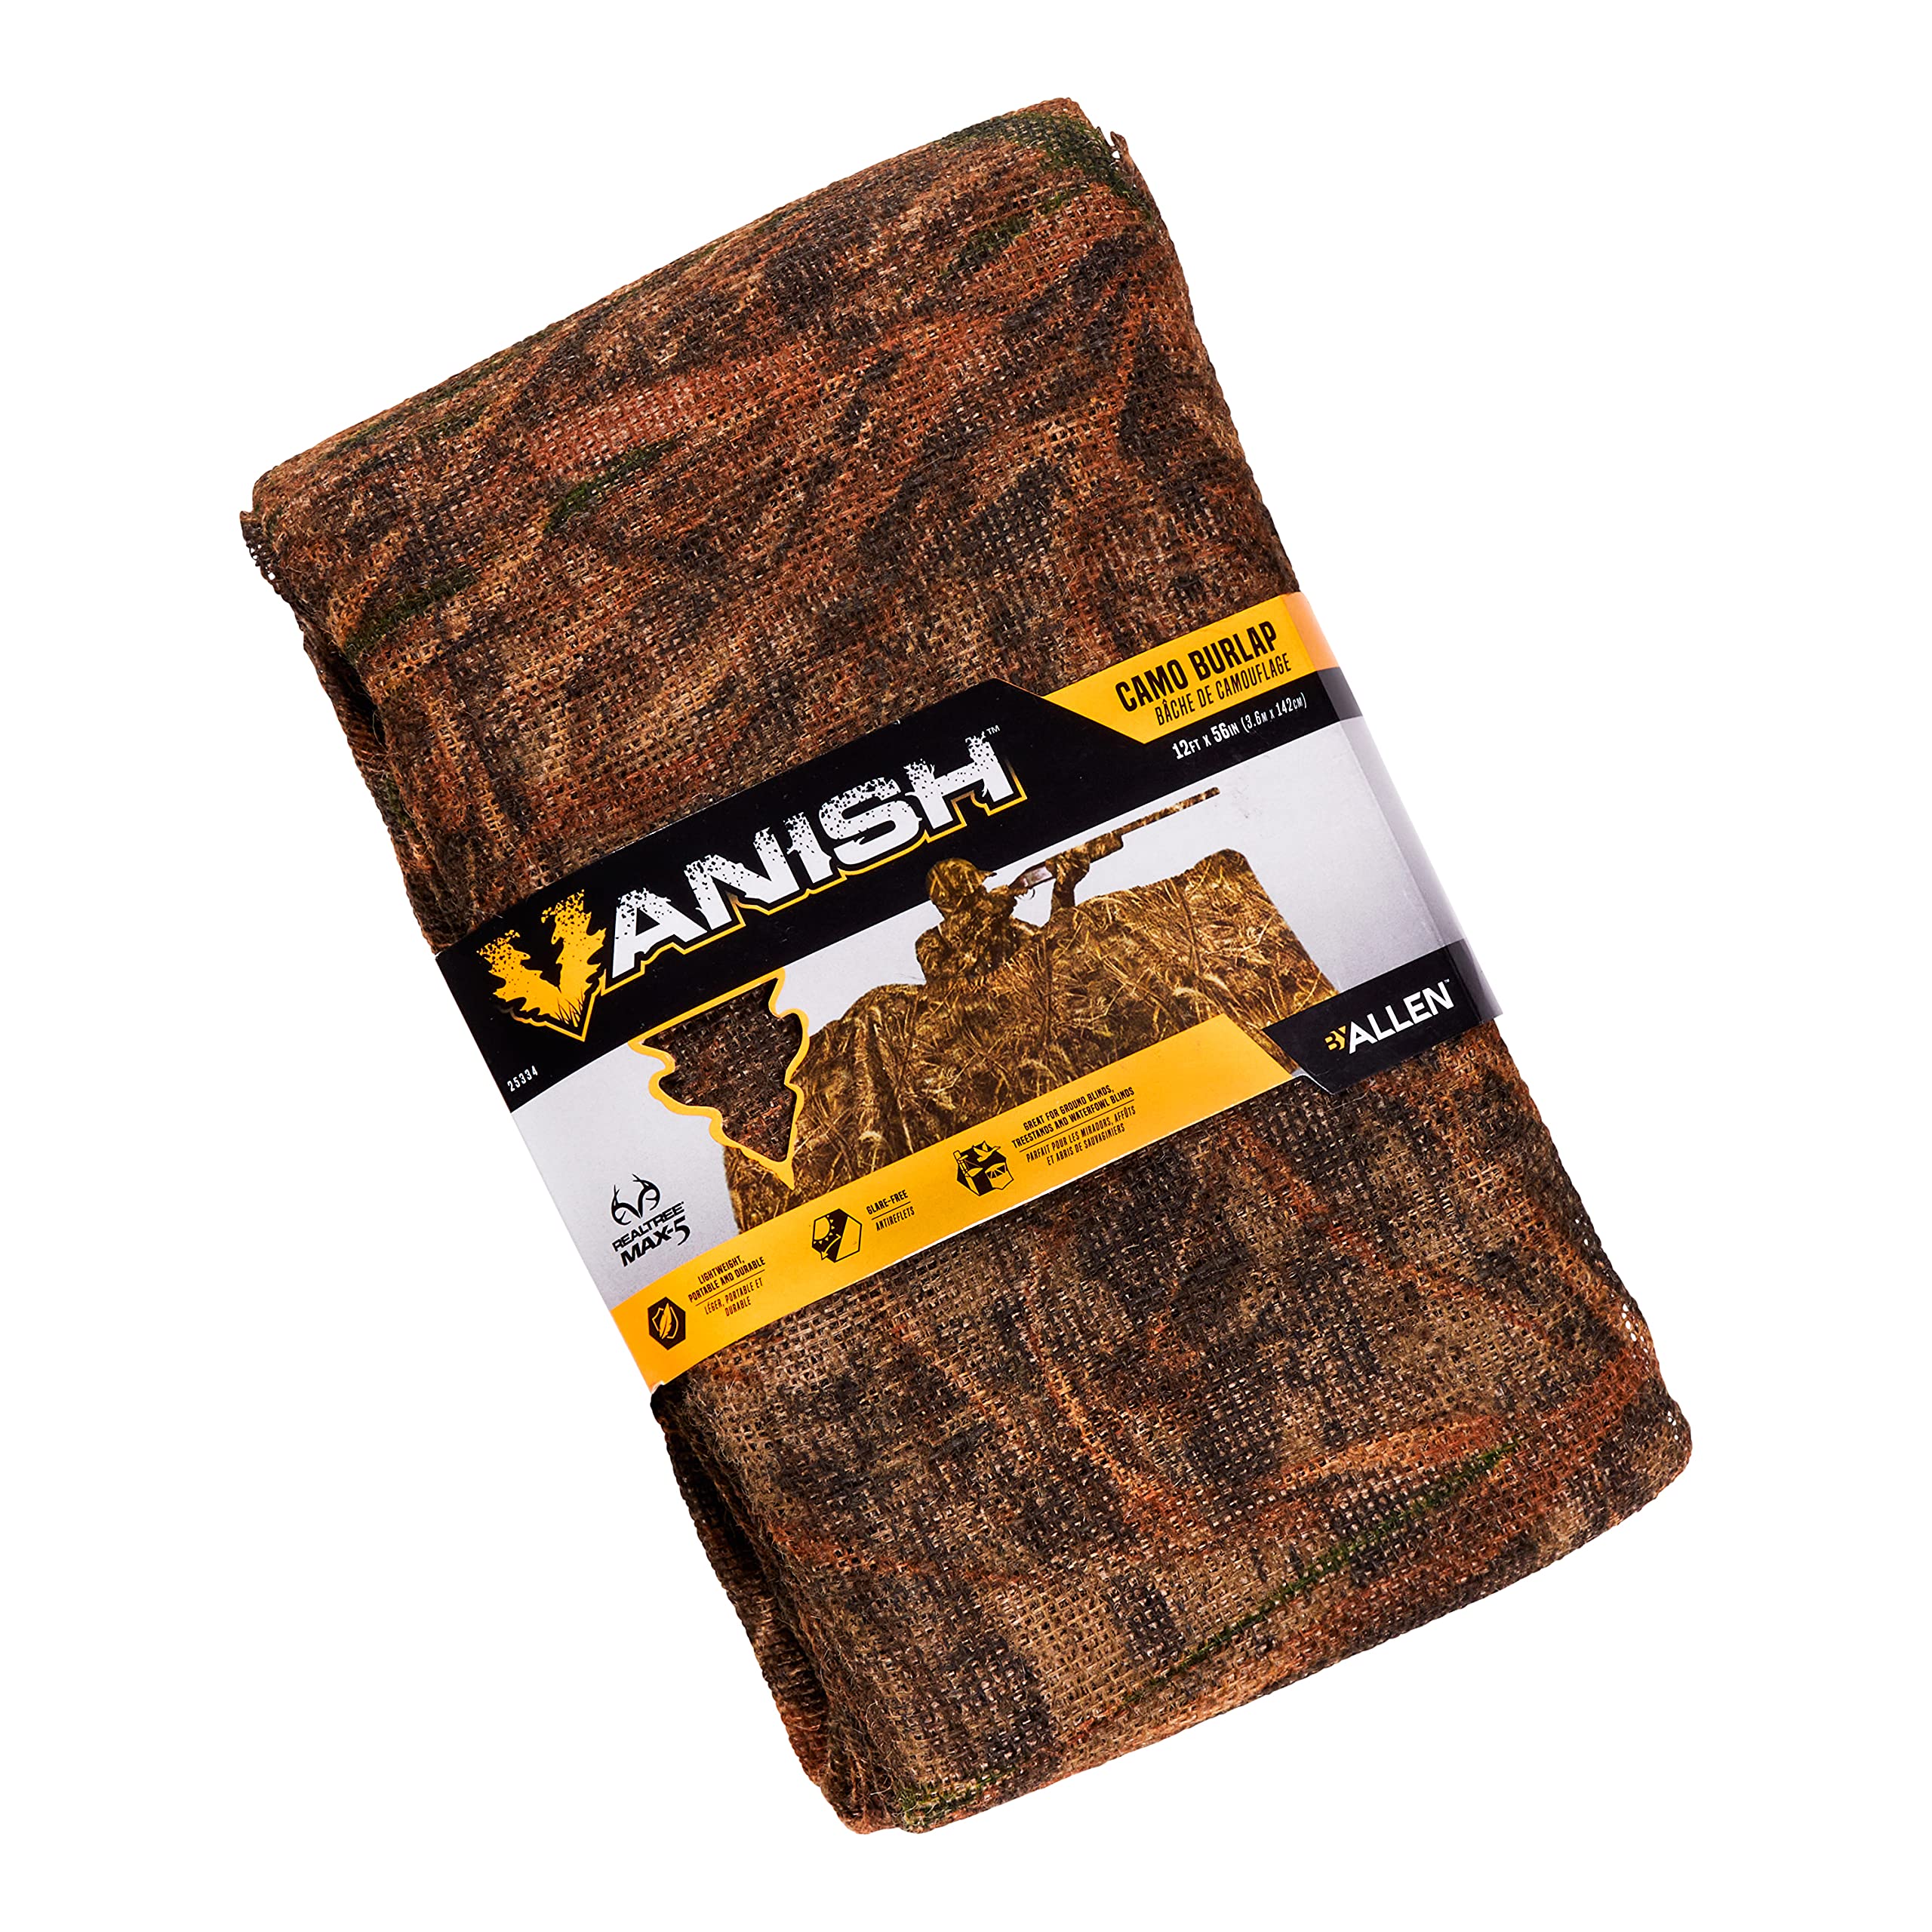 Allen Company Vanish Hunting Blind Burlap, 12ft x 54 in - Mossy Oak/Realtree/Grain Belt Camo, for Hunting Ground Blinds, Tree Stands and More